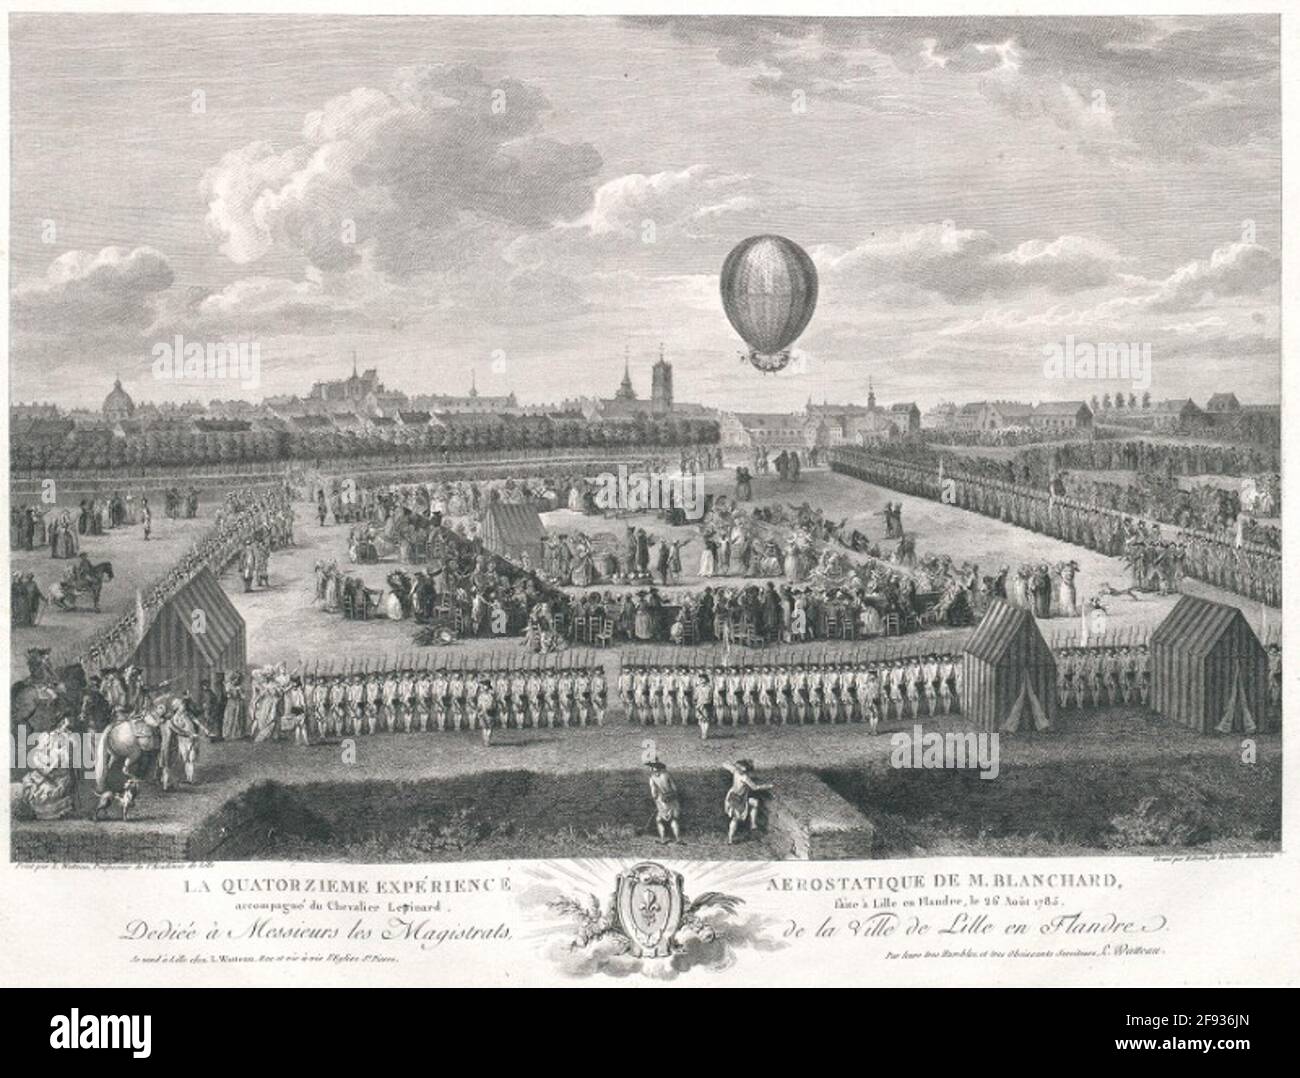 The Quatorzieme Aerostatic Experience of M. Blanchard accompanied by Knight Levinard, made in Lille in Flanders, August 26, 1785 Widmung: Dedicie with the magistrates, from the city of Lille to Flanders Stock Photo